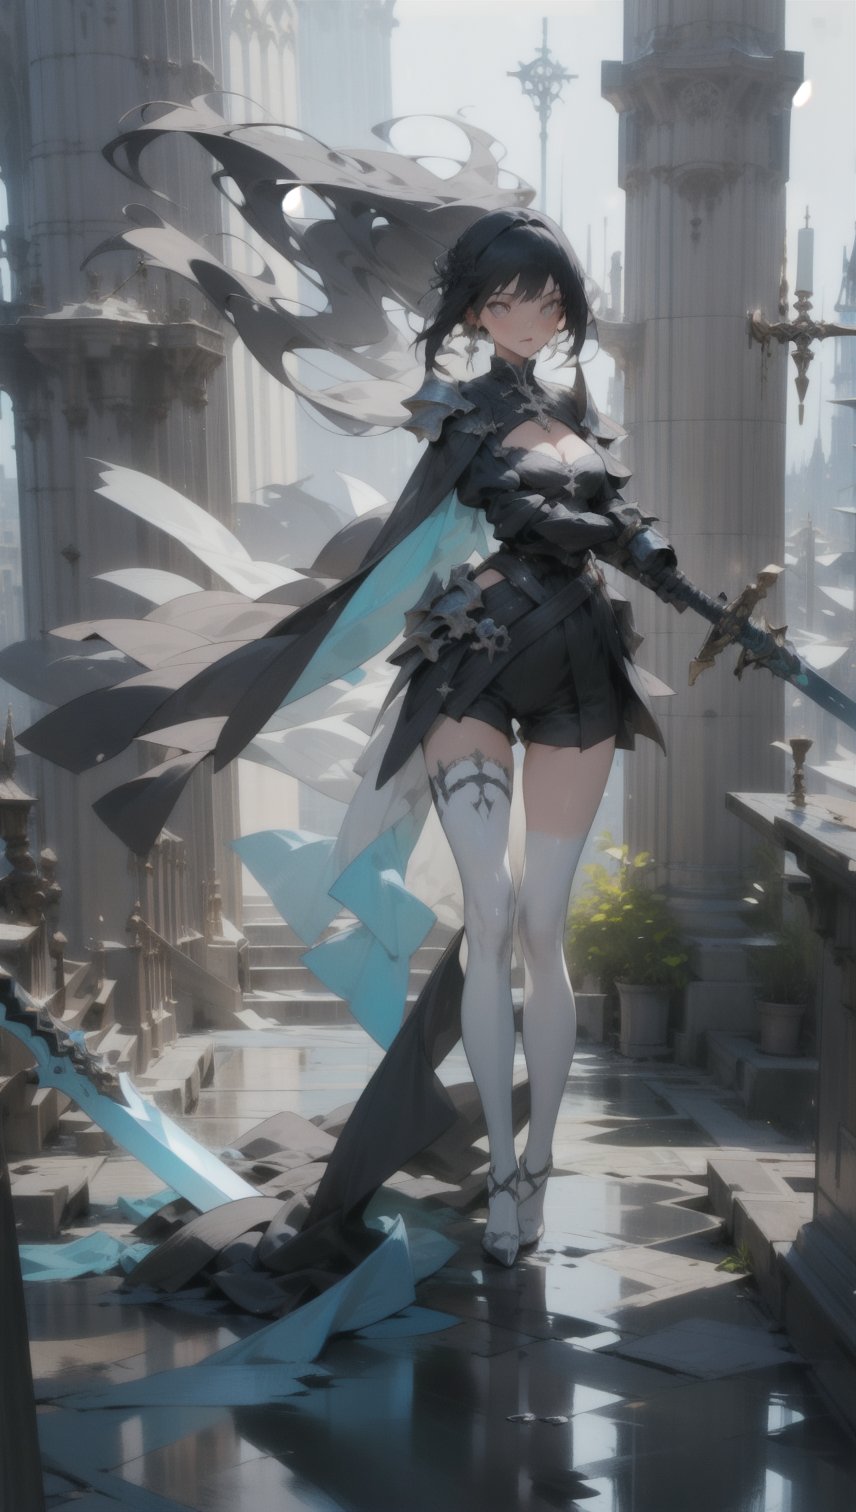 Anigame, vivid, raw, 1girl, solo, full_body, cleavage, long dress, very_long_hair, 21years old, levitating, dash jumping, (floating in the air)), sharp image, ((black_full_armor)), (((pointing sword with two hands towards alter))), ((glowing sword)), lava, soul, demon, death, knight, fights monsters, bright_light, dark_light, action side view, active, queen, supernatural, beauty, sexy, random background, neon lights, (fit in the frame)dynamic_angle, large_breasts, dynamic_lighting, dynamic_action, cleavage, (dynamic pose), ((see_through)), string, minimal fabric ,clothes_tearing, dynamic effects, water, magic, thigh_gap, slim_body, slim_thigh, sorcerer ,Anigame ,pastelbg, legs_open, detailed_face, impossible_fit, fit_in_frame, full_body, sfw, facing_viewer,side_view,highres,More Detail, UHD,High detailed ,Color Booster,realistic,girl, pastelbg, beautiful_background, ((in the holy cathedral))